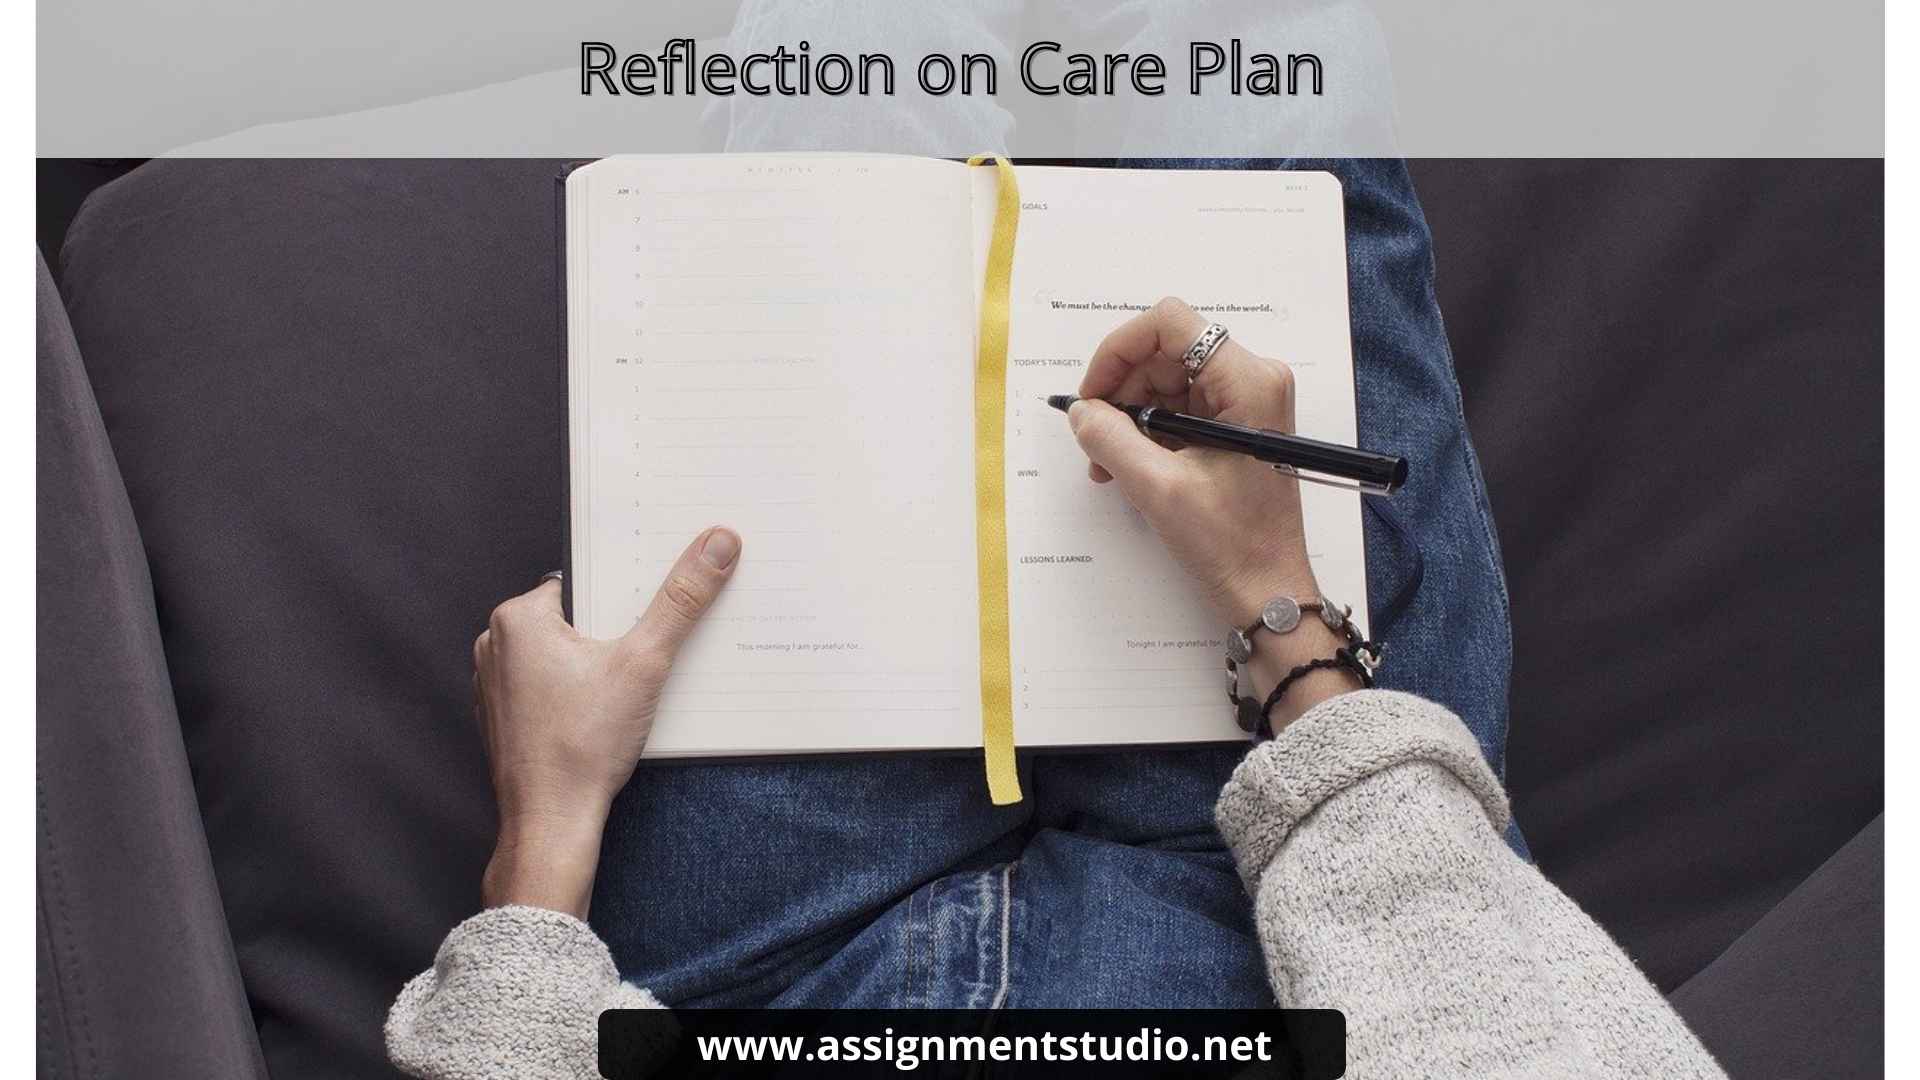 Reflection on care plan